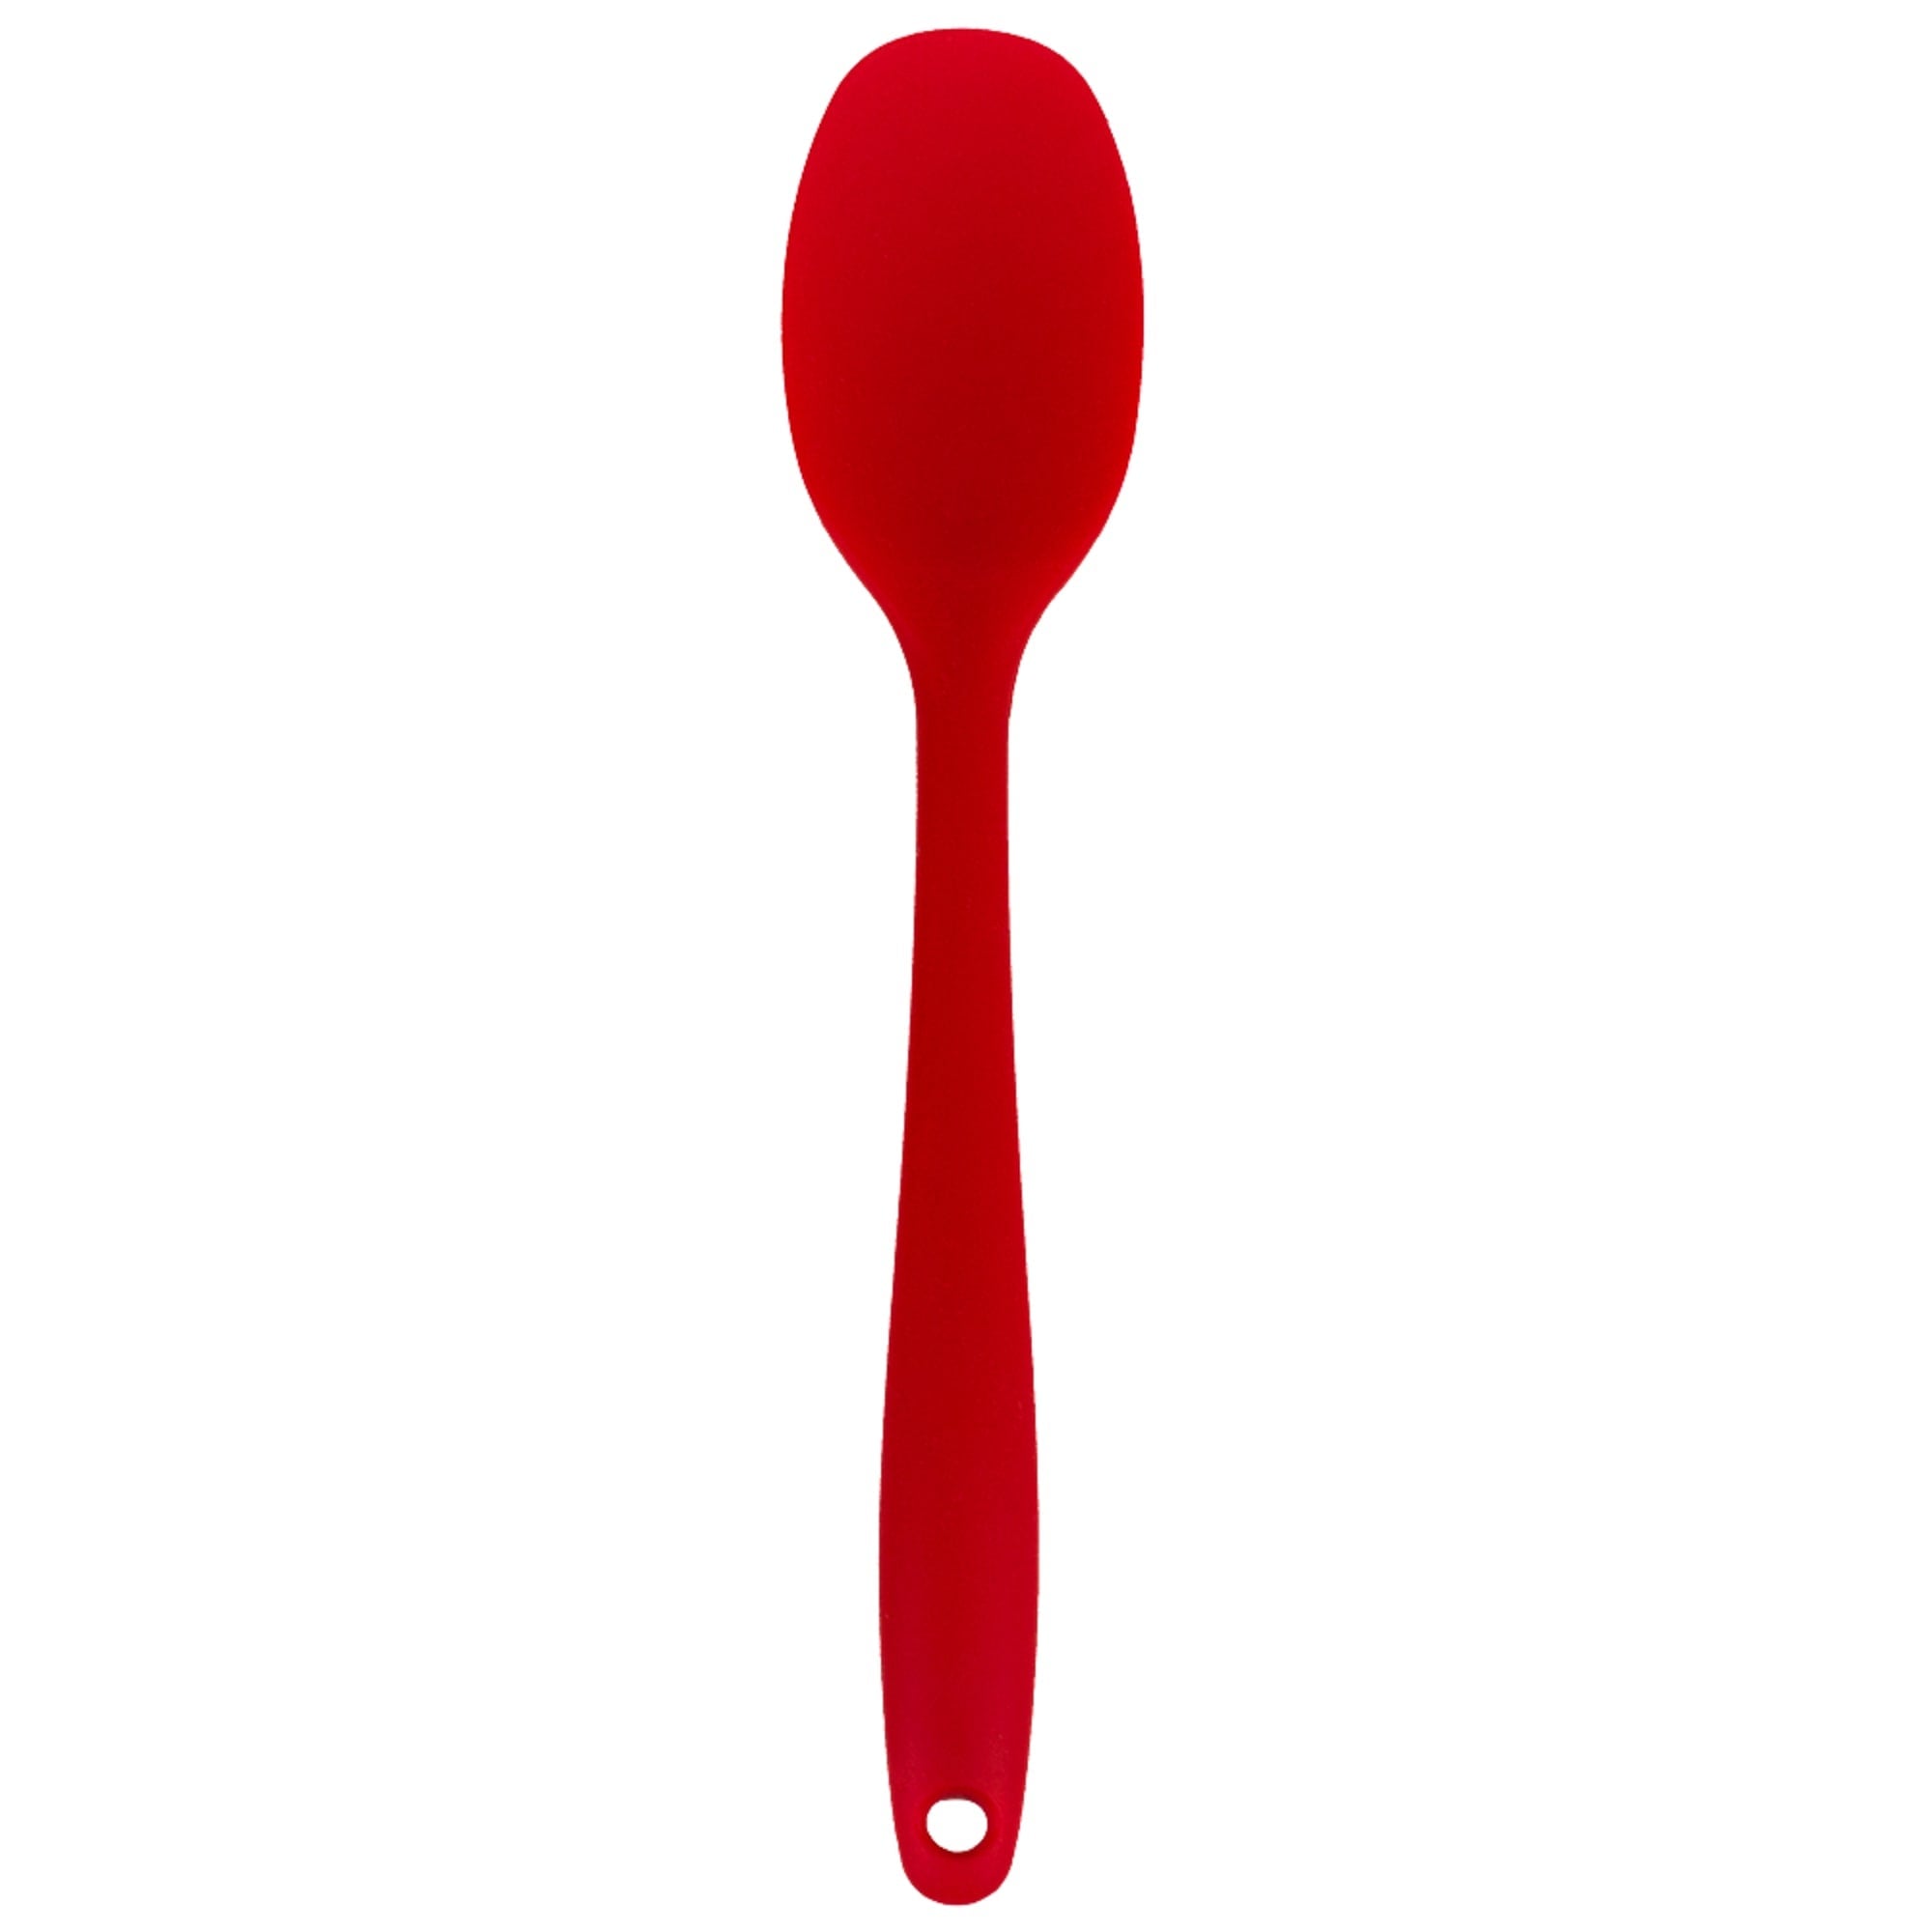 Home Basics Heat-Resistant Silicone Cooking Spoon, Red $3.00 EACH, CASE PACK OF 24